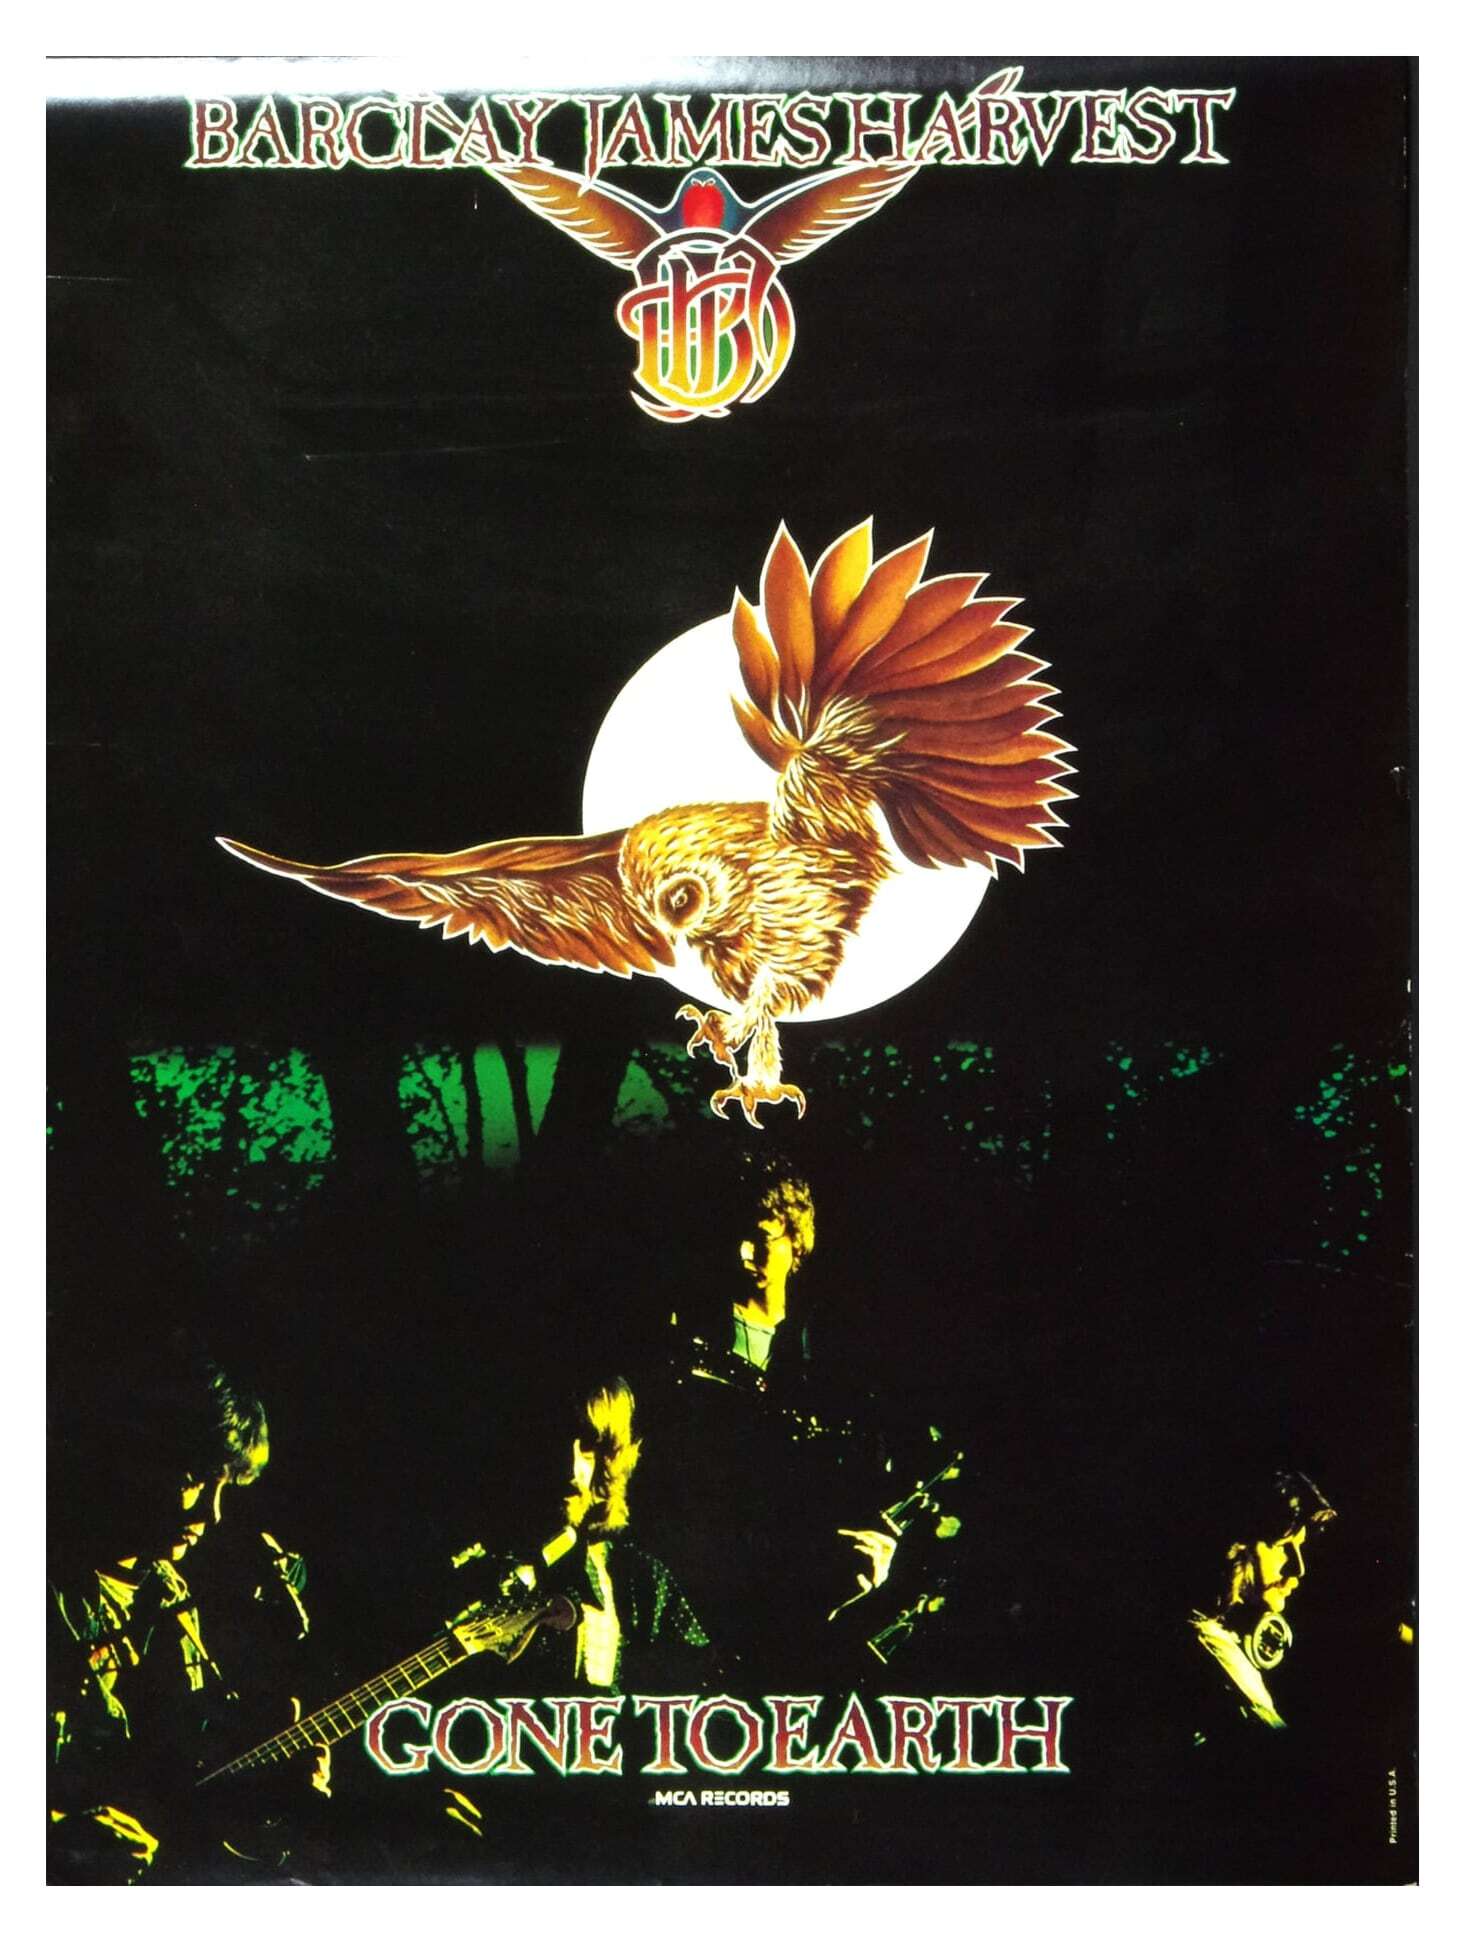 Barclay James Harvest Poster 1977 Gone To Earth Album Promotion